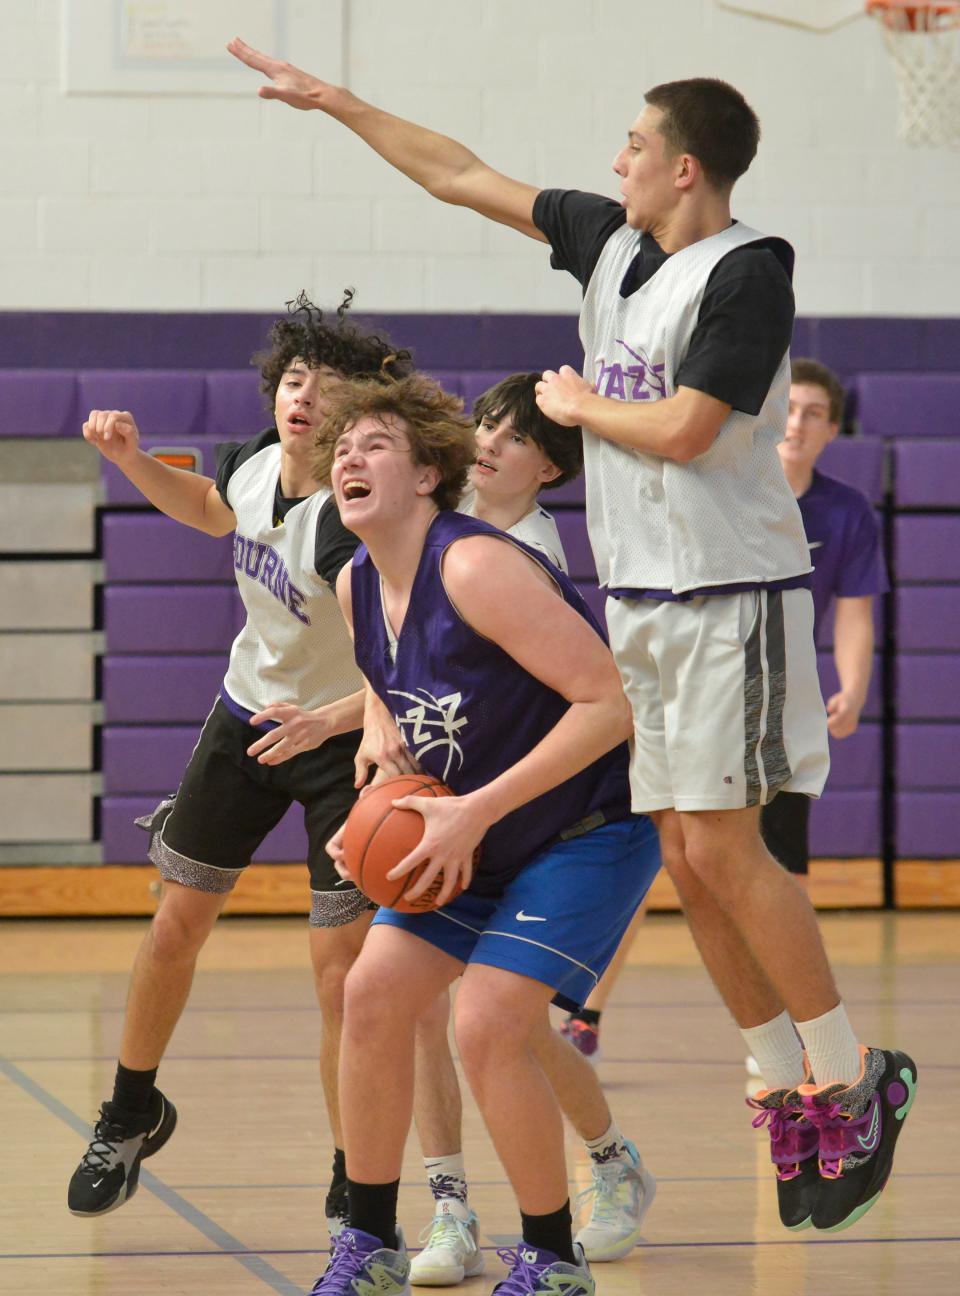 Bourne's Nate Reynolds grabs a loose ball and goes up for a basket during a practice drill. The Bourne High School boys basketball team held a practice Thursday afternoon. Merrily Cassidy/Cape Cod Times
(Photo: Merrily Cassidy/Cape Cod Times)